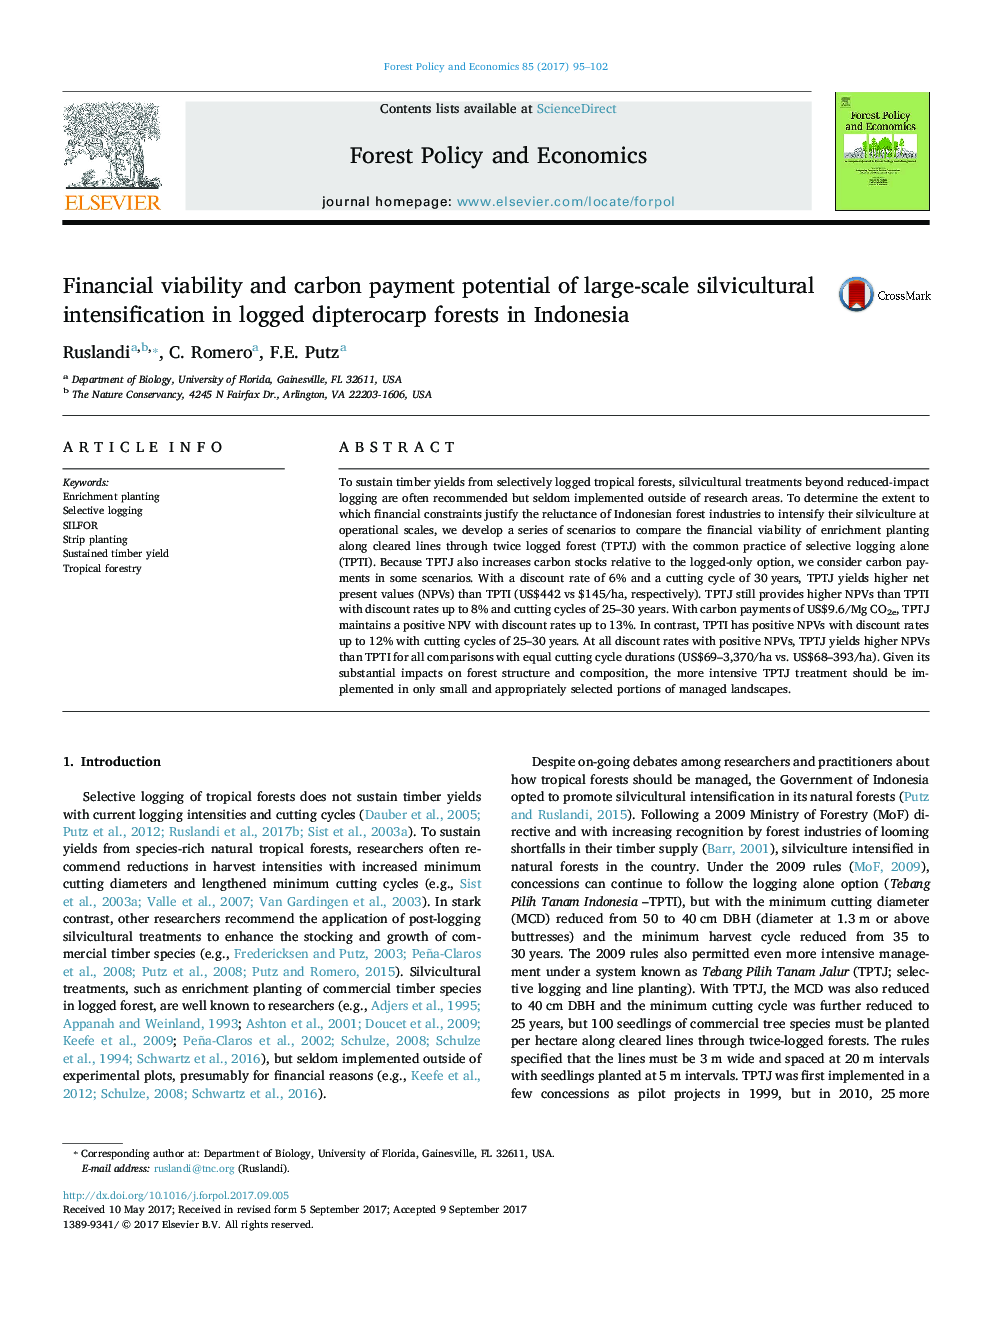 Financial viability and carbon payment potential of large-scale silvicultural intensification in logged dipterocarp forests in Indonesia